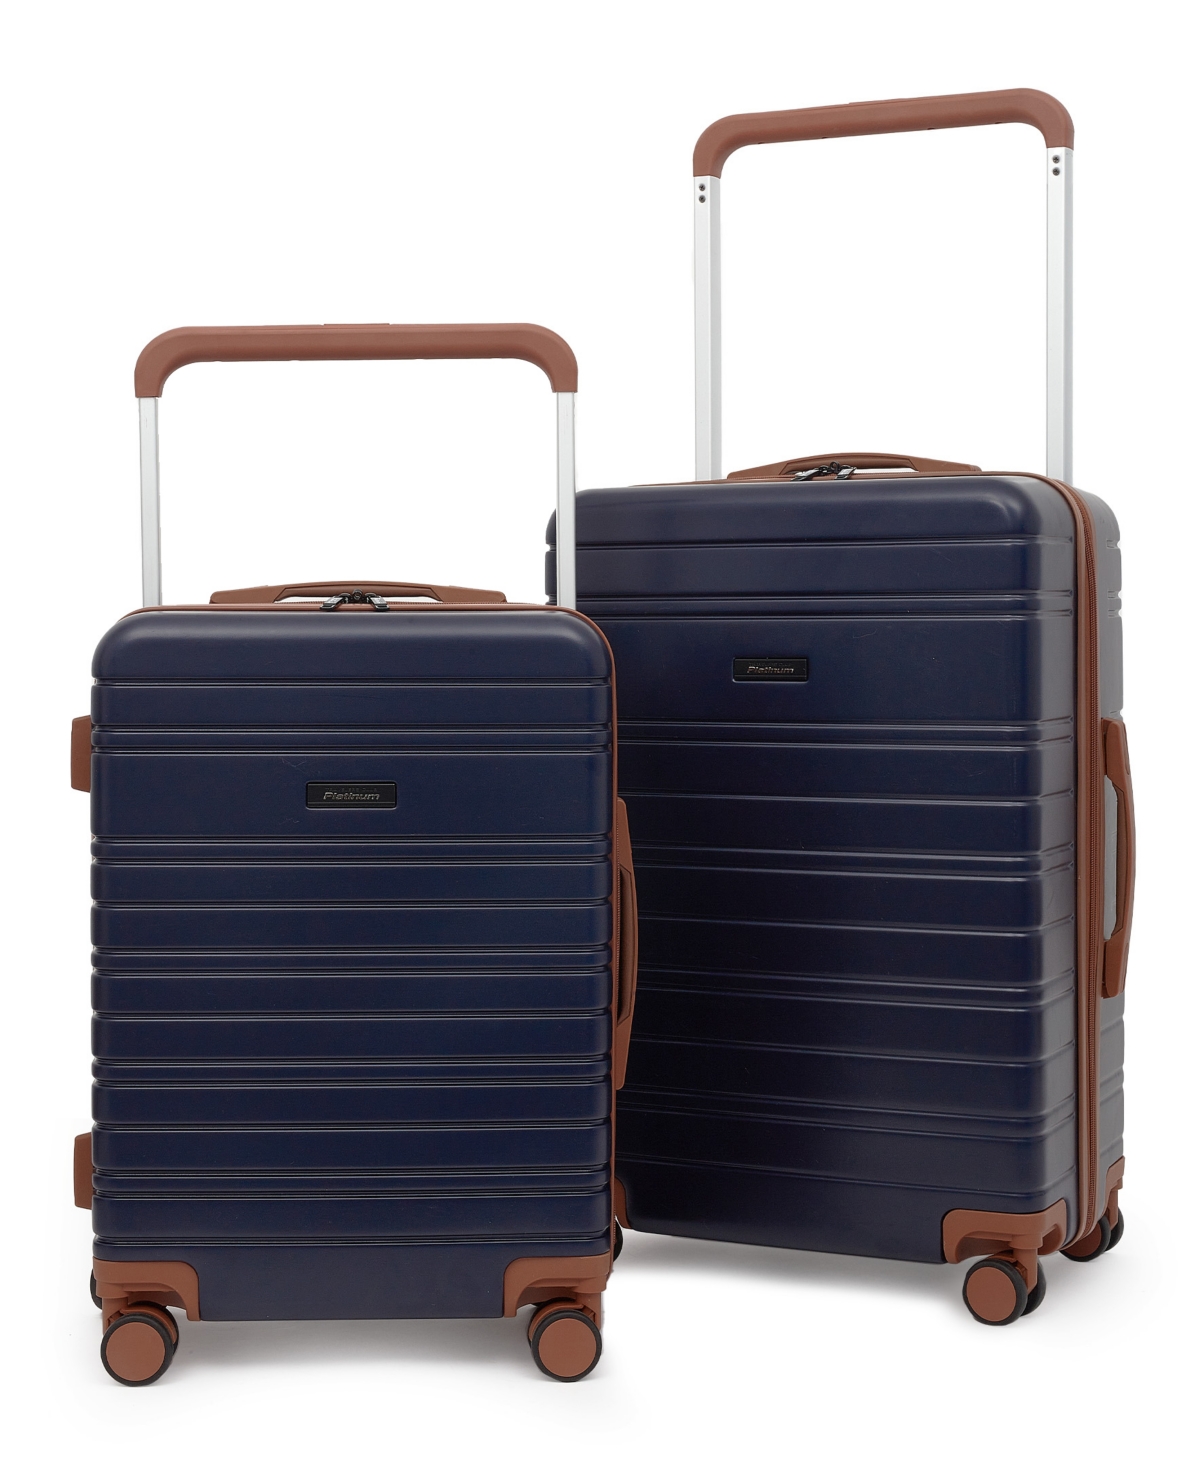 Travelers Club Navigate Collection 2 Piece Rolling Hard Case Luggage Set With X-tra Wide Telescopic Handle In Navy